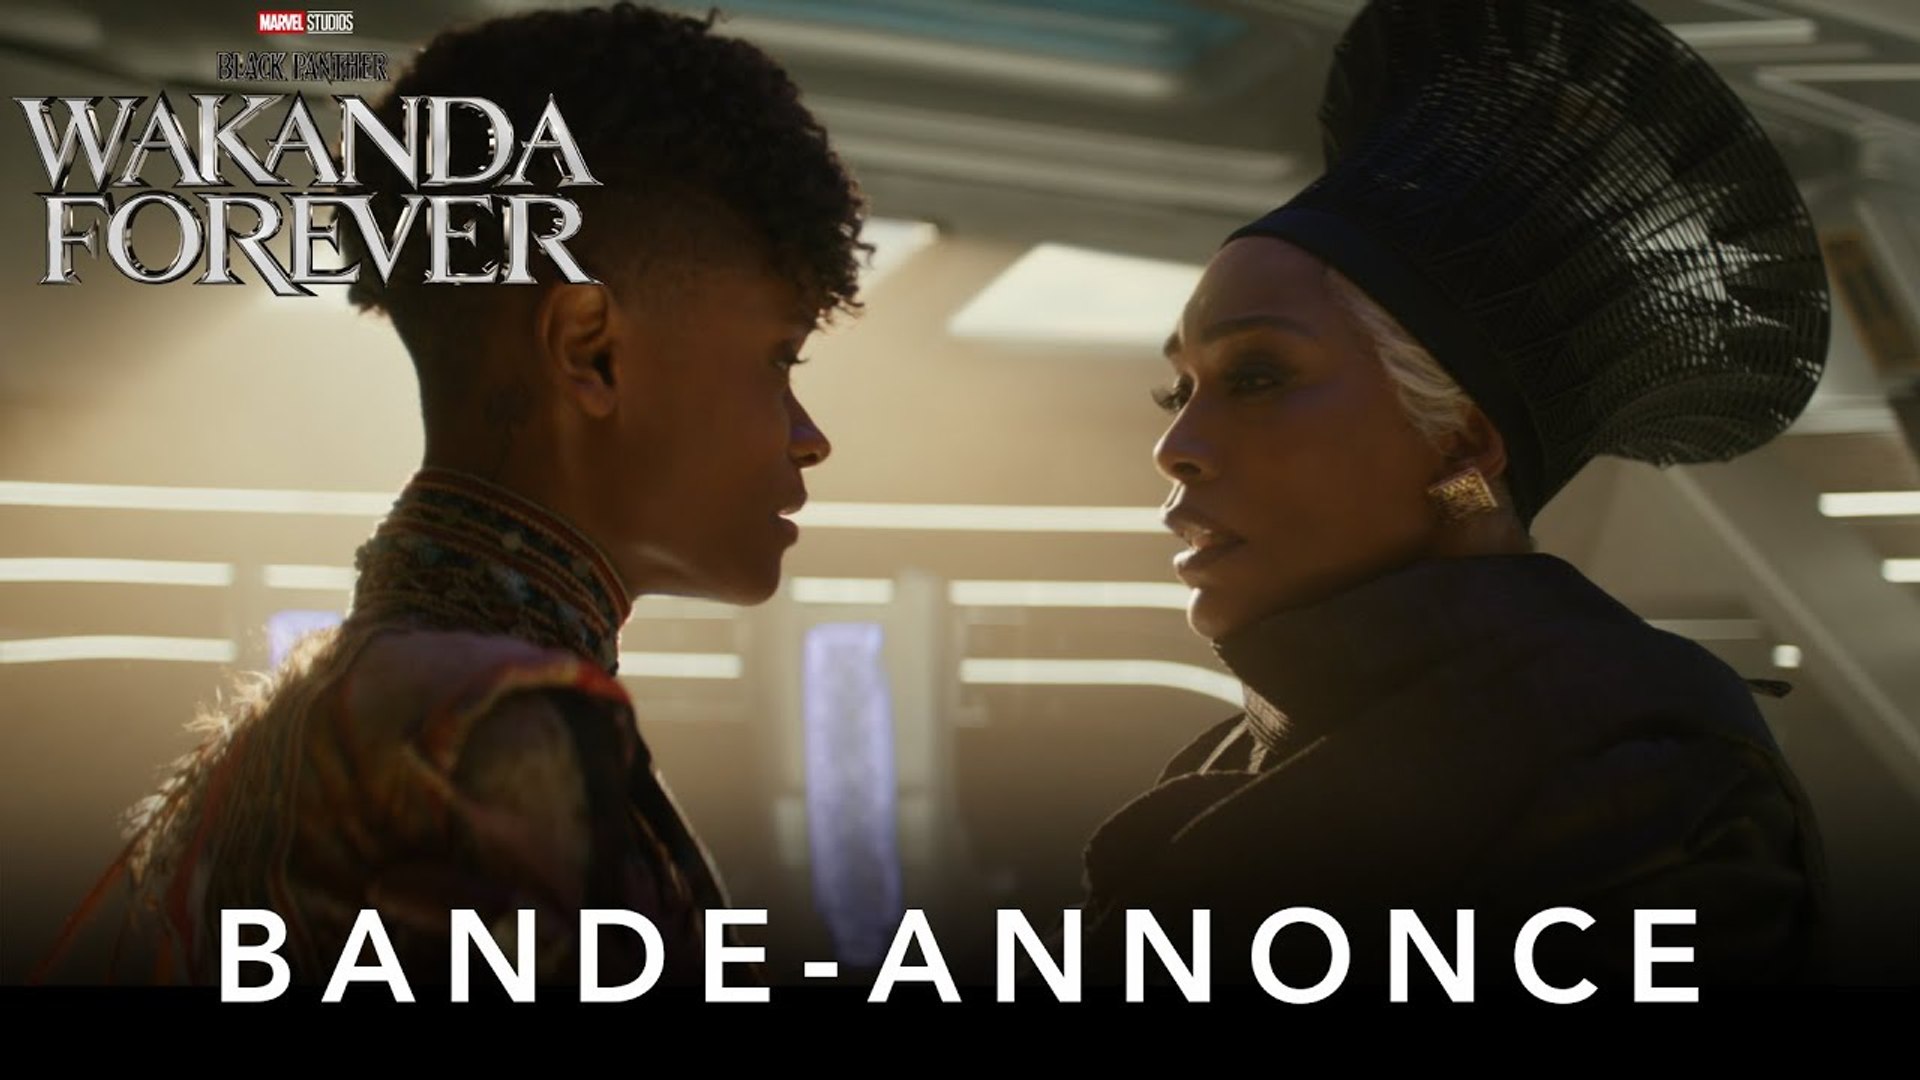 Black Panther Wakanda Forever - Bande-annonce officielle (VOST) Marvel -  Vidéo Dailymotion